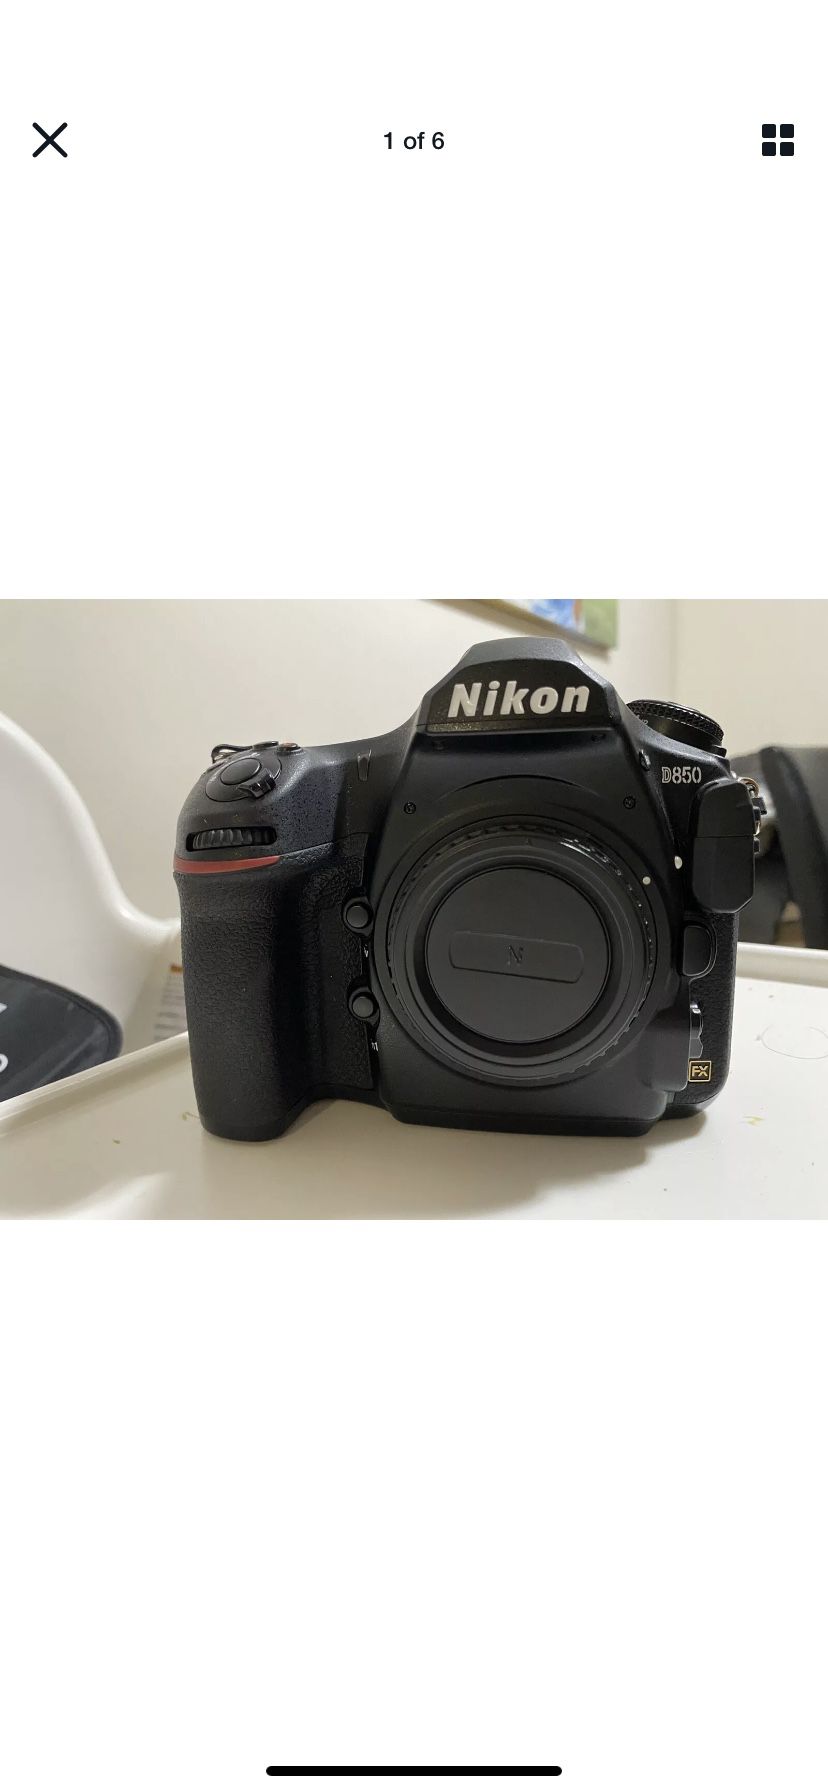 Nikon D850 used. Excellent working condition